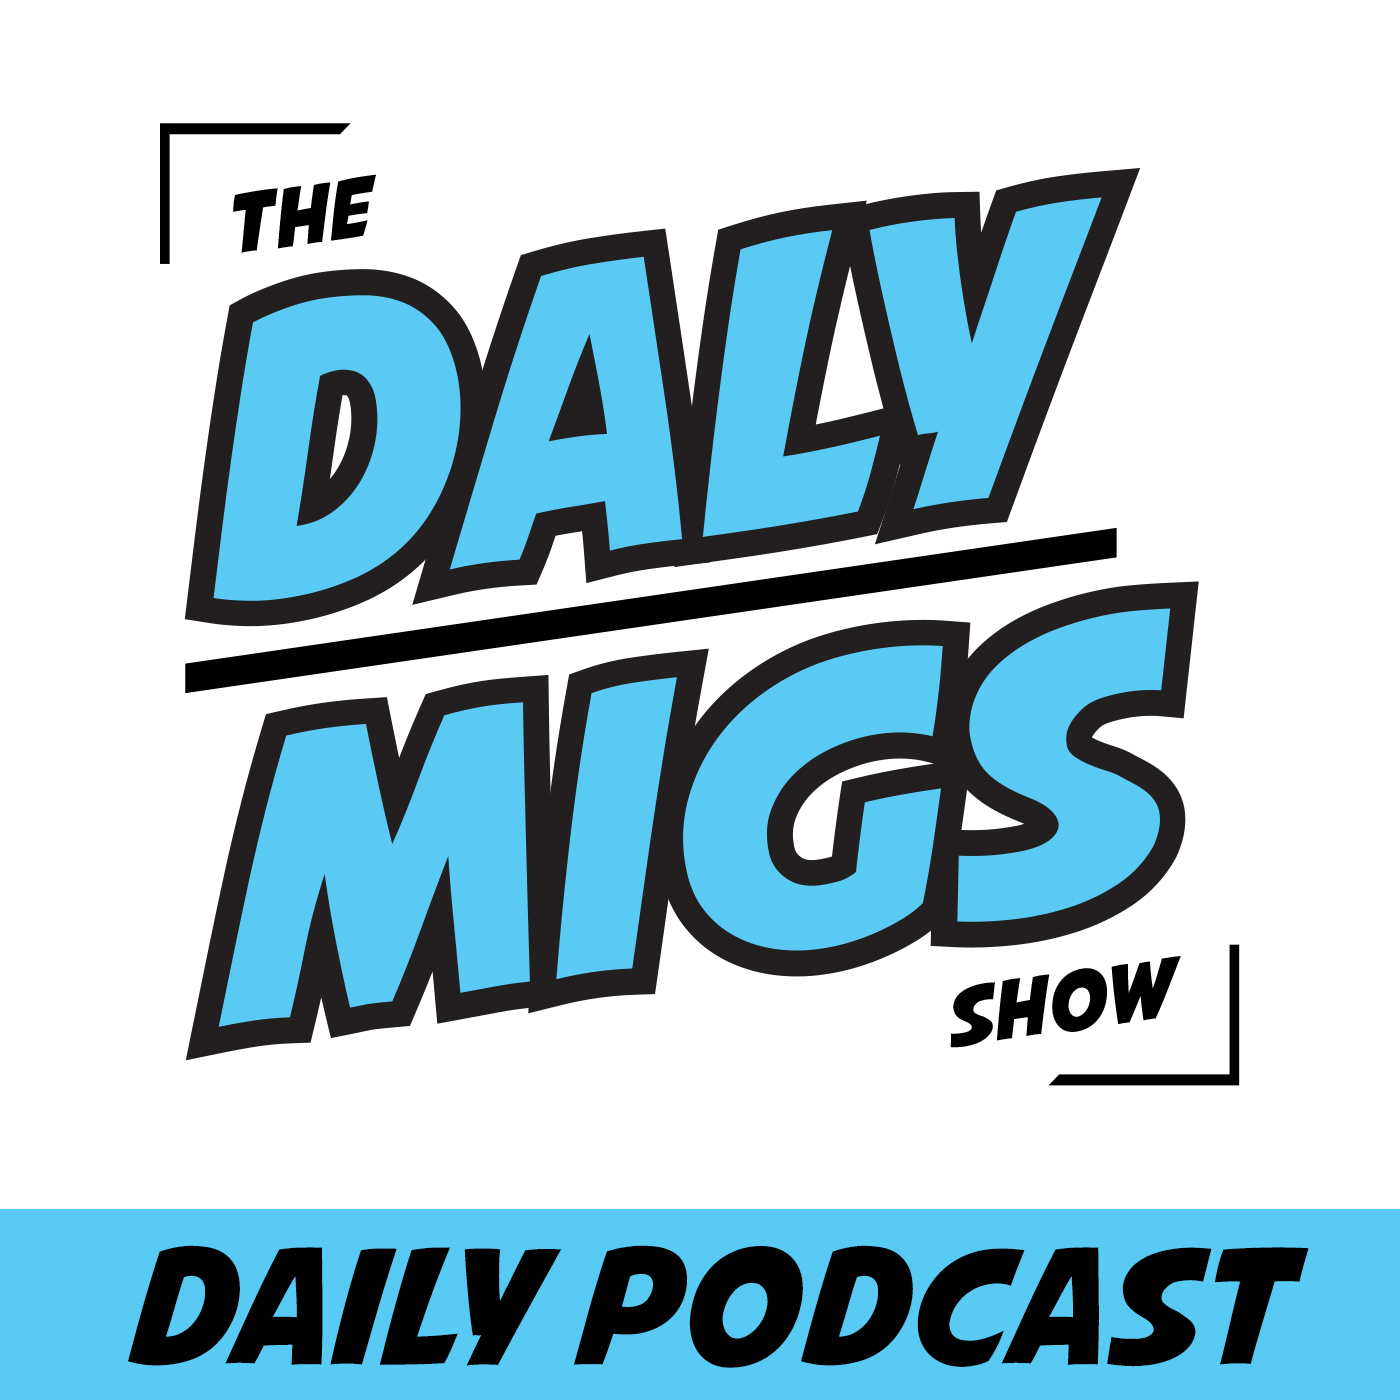 Daily Podcast pt. 1 - "We take FOUR shots!"